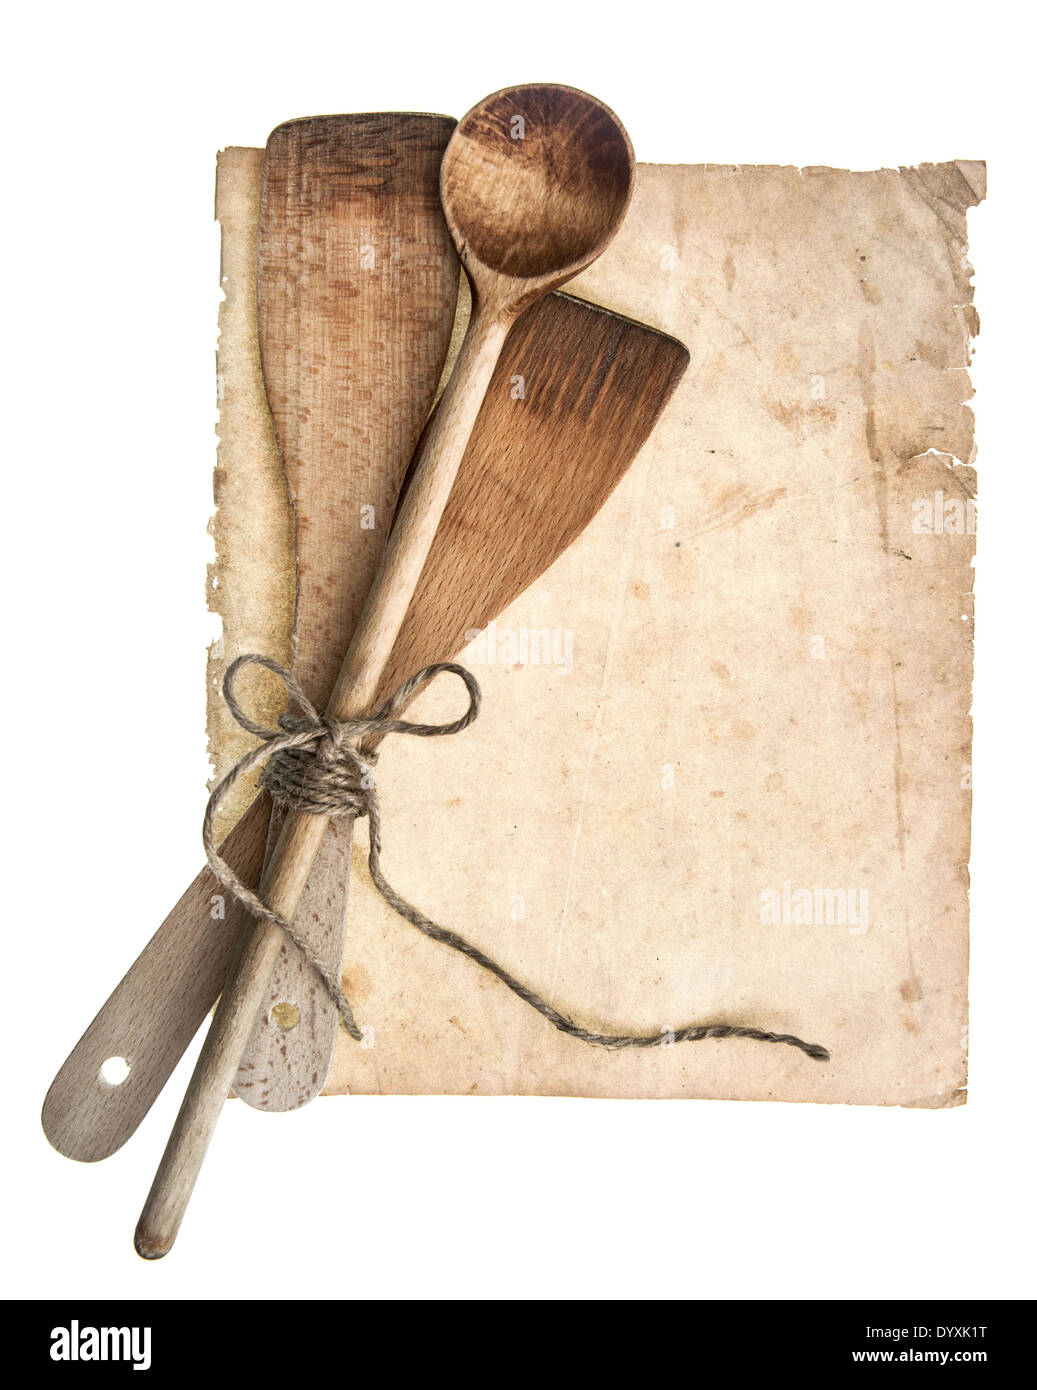 Vintage wooden kitchen utensils and old cookbook page isolated on white background. Grandma's recipies concept Stock Photo